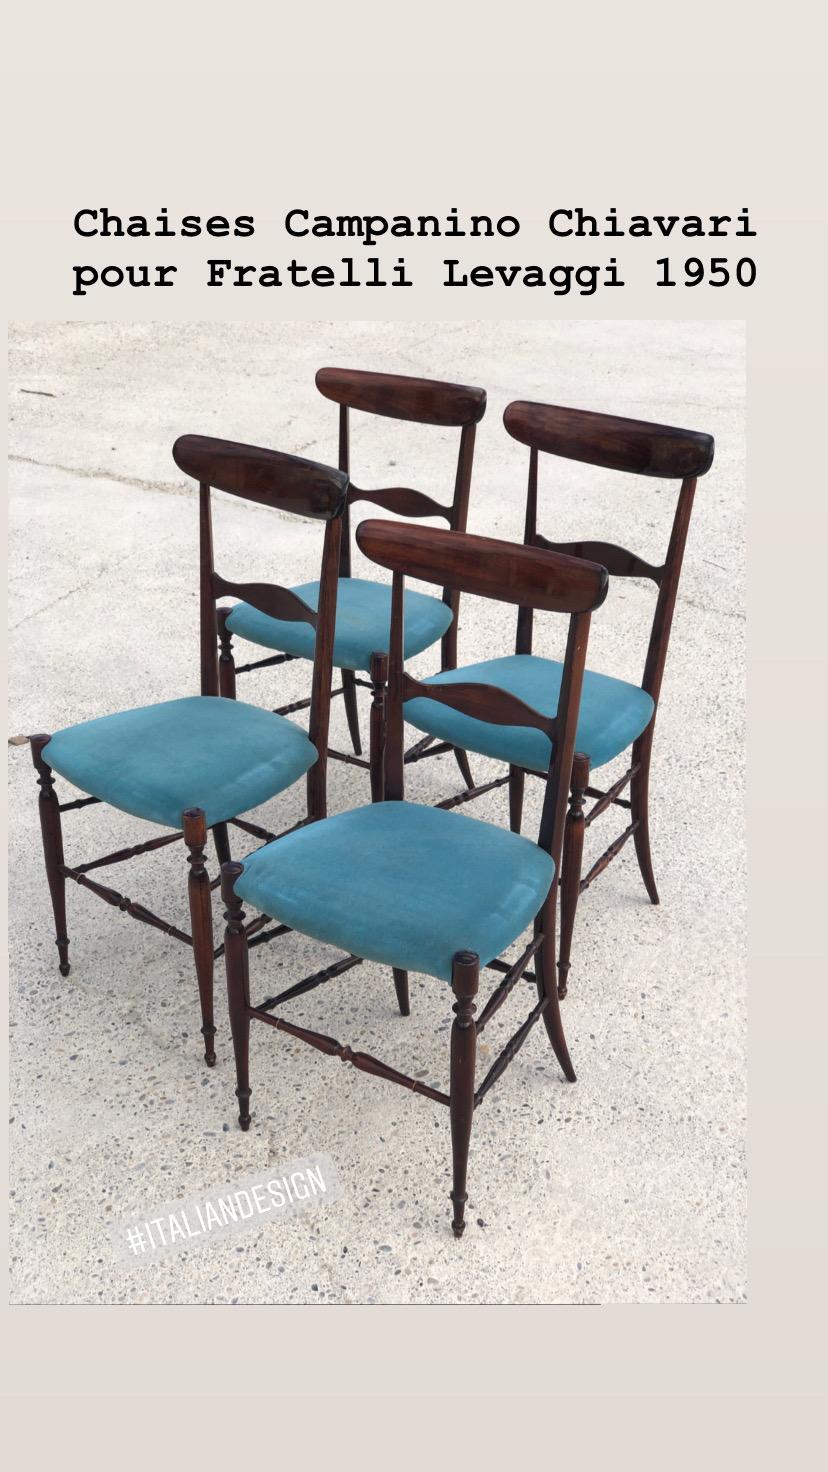 20th Century, 4 Campanino Chiavari Chairs in Walnut for Fratelli Levaggi 1950 In Good Condition For Sale In Saint Rémy de Provence, FR